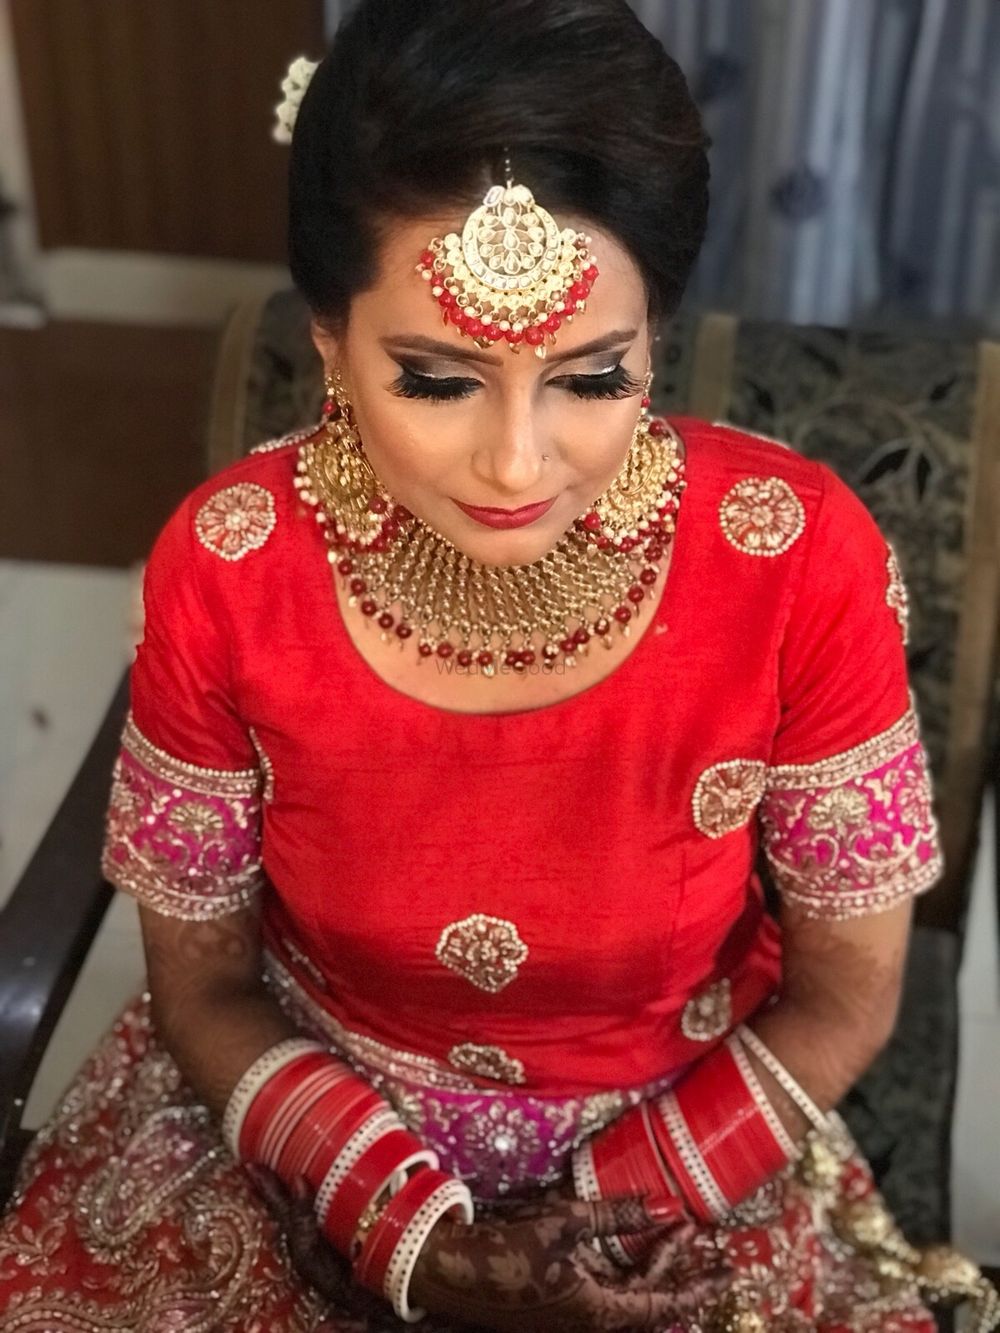 Photo From Party looks 2018 - By  Jasdeep Makeovers